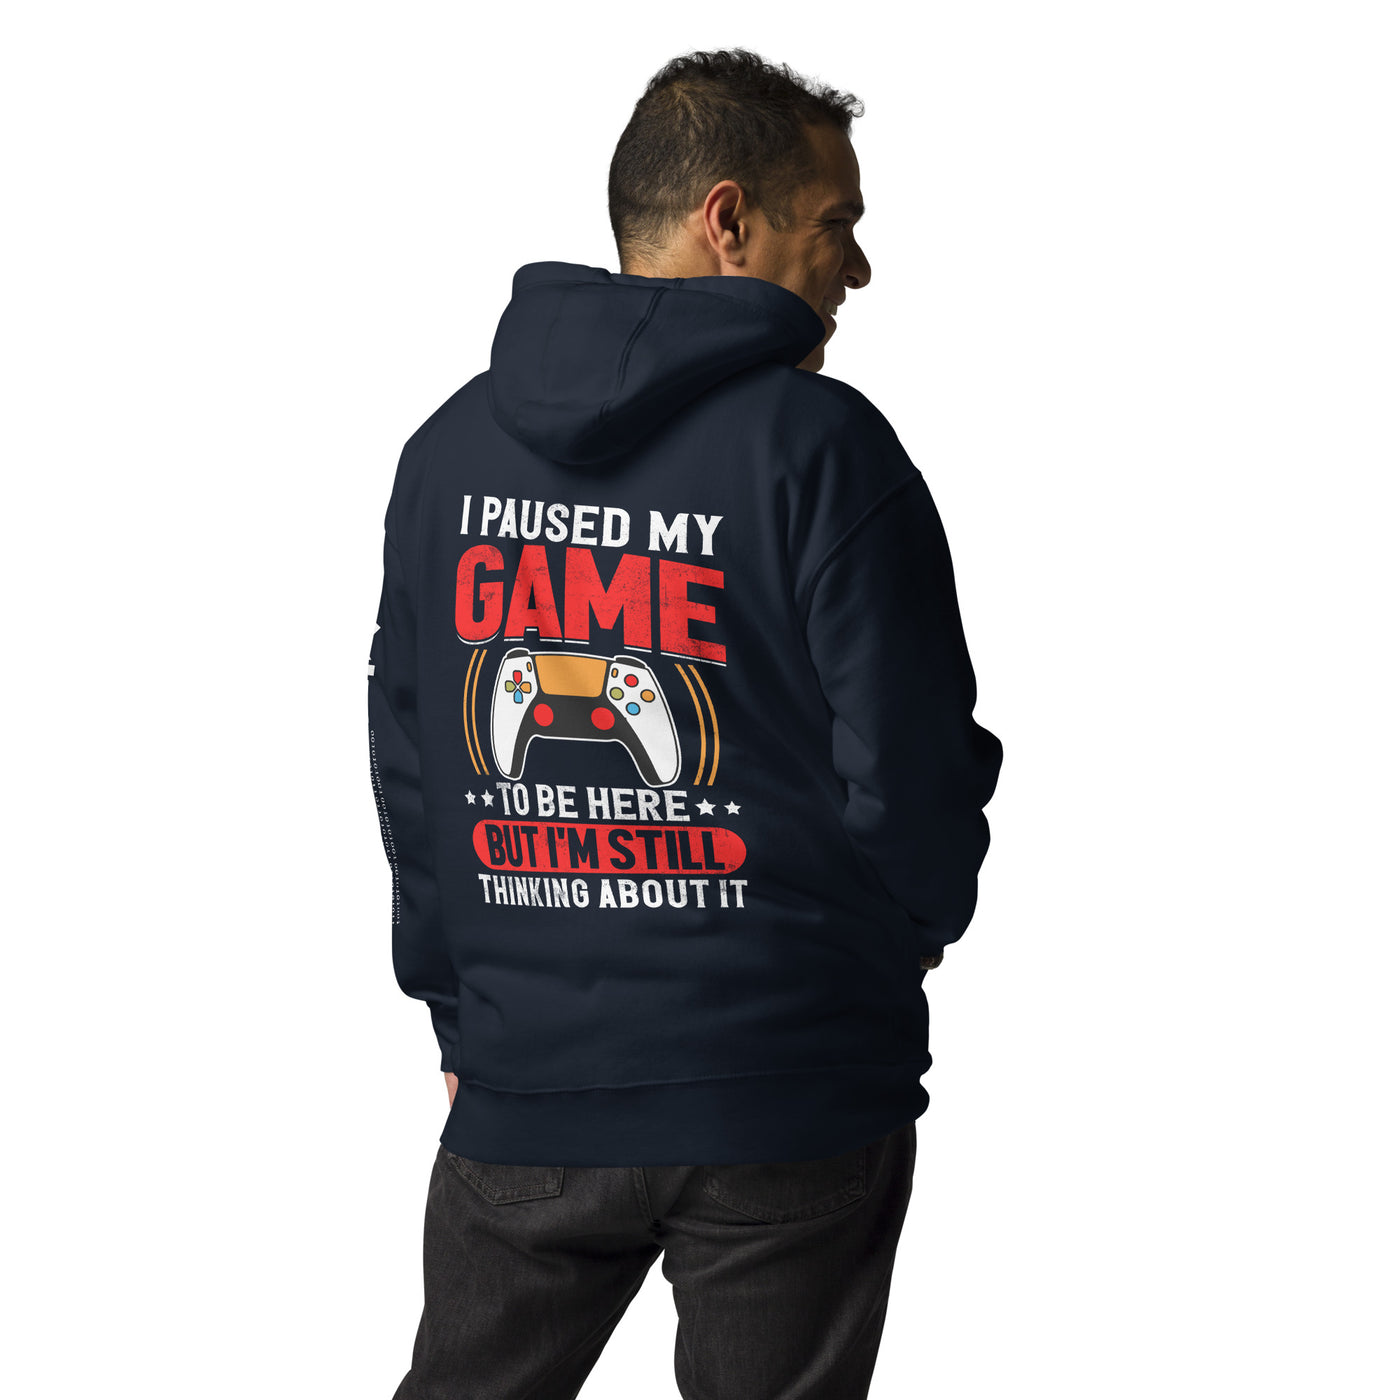 I Paused My Game To Be Here but I am still thinking about it - Unisex Hoodie (back print)